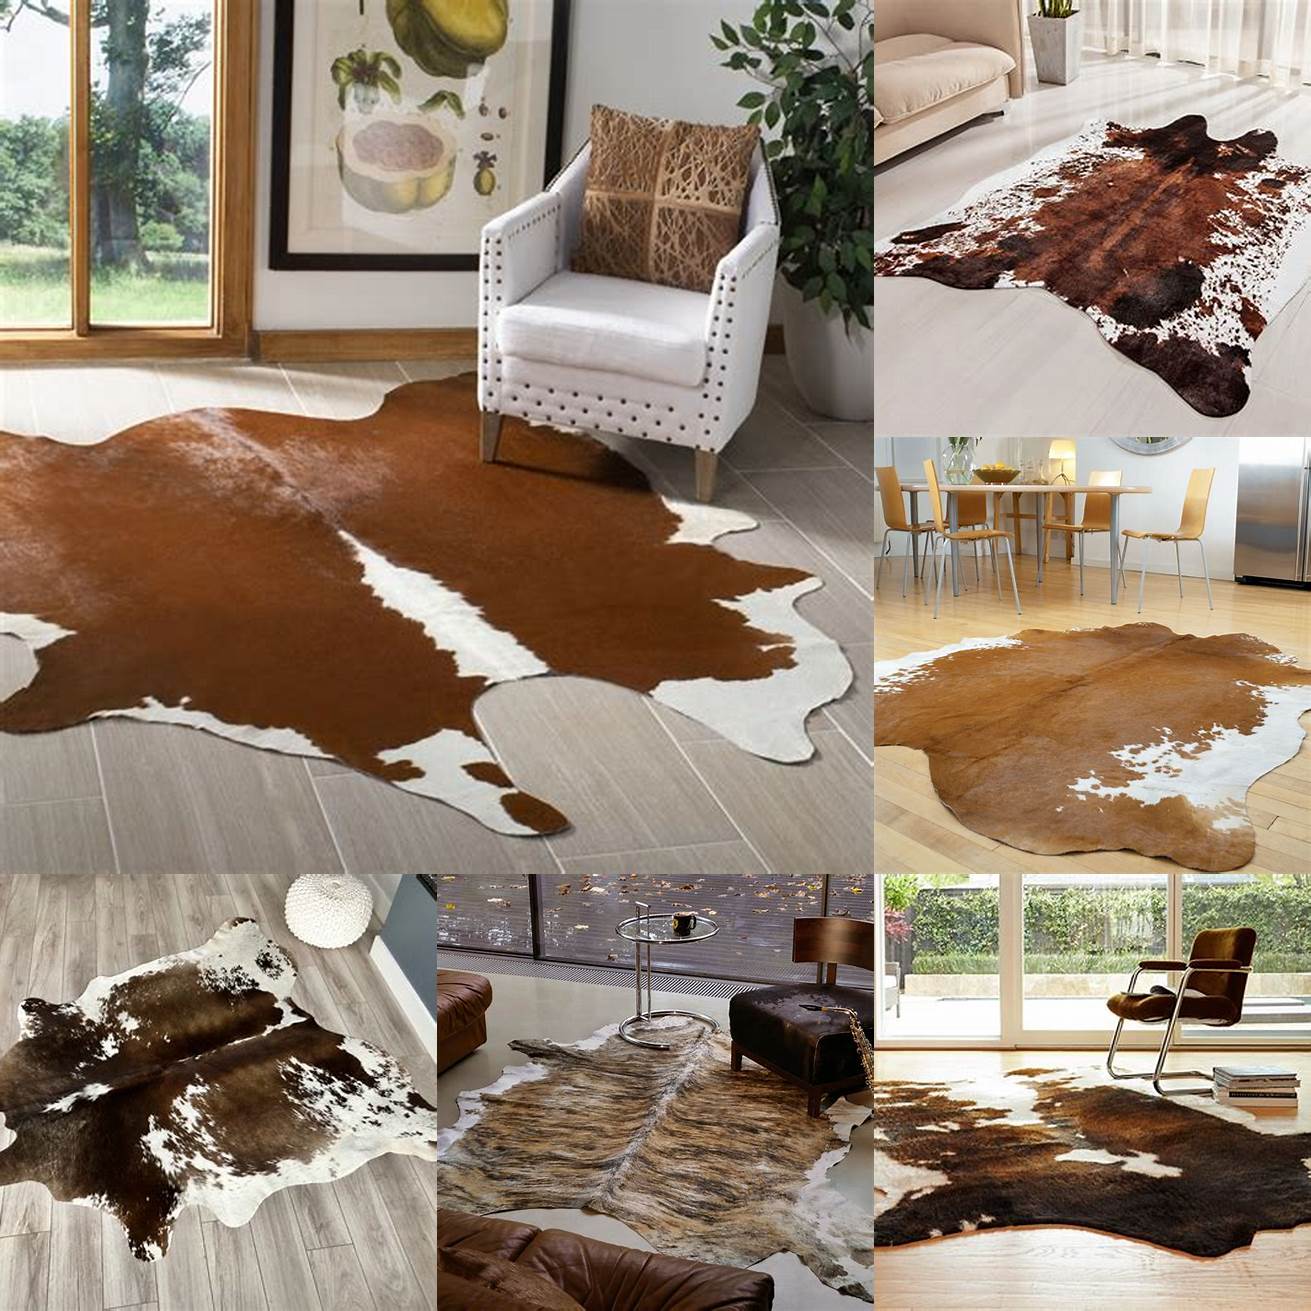 Cowhide rugs are durable and easy to clean making them ideal for high-traffic areas They are also hypoallergenic and do not collect dust like traditional rugs